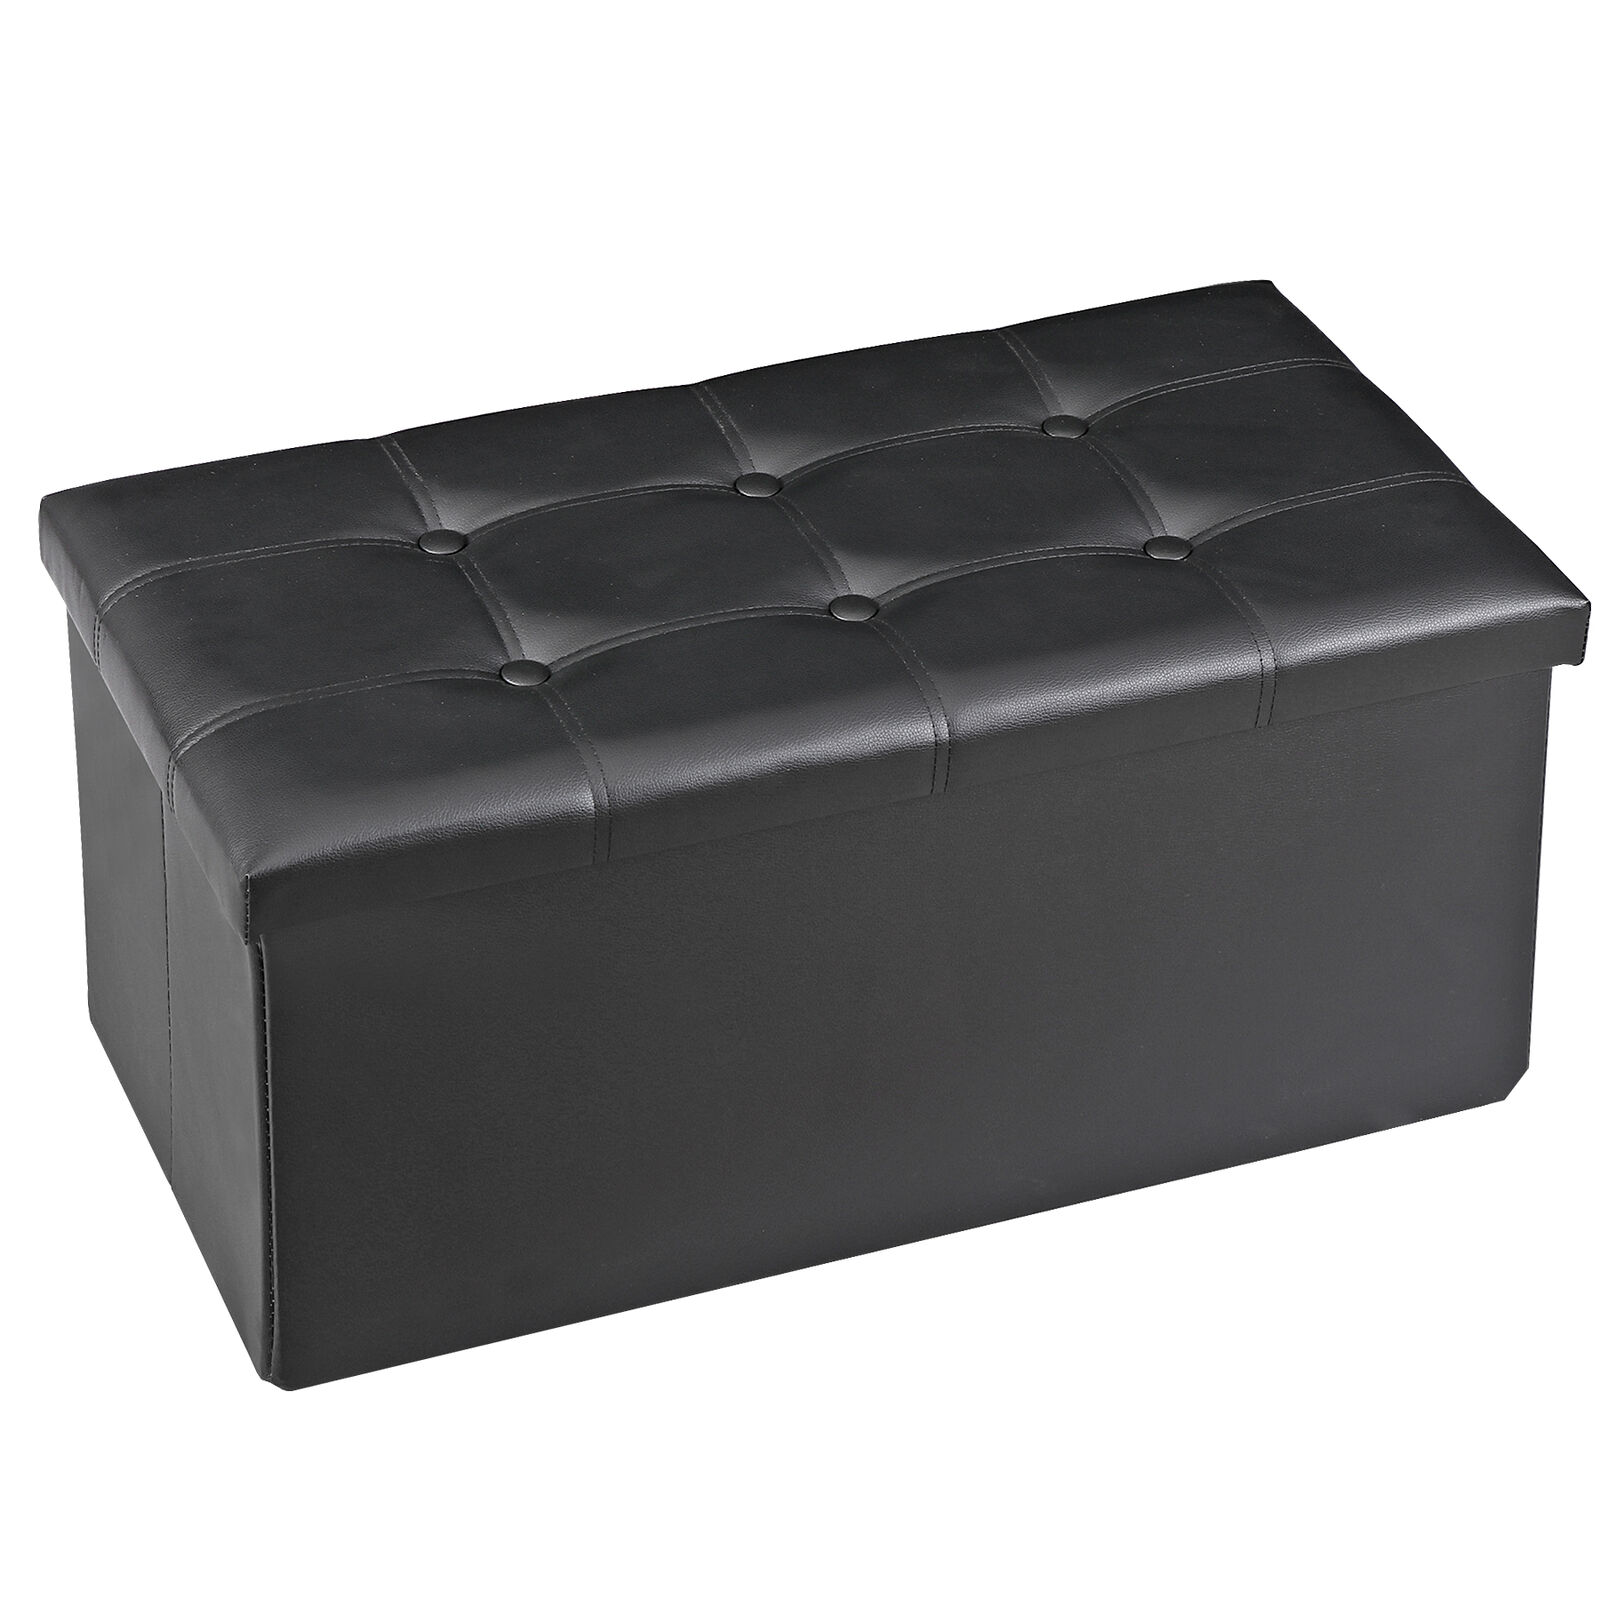 Folding Storage Ottoman Bench Storage Chest Footrest Stool Bench for Living Room